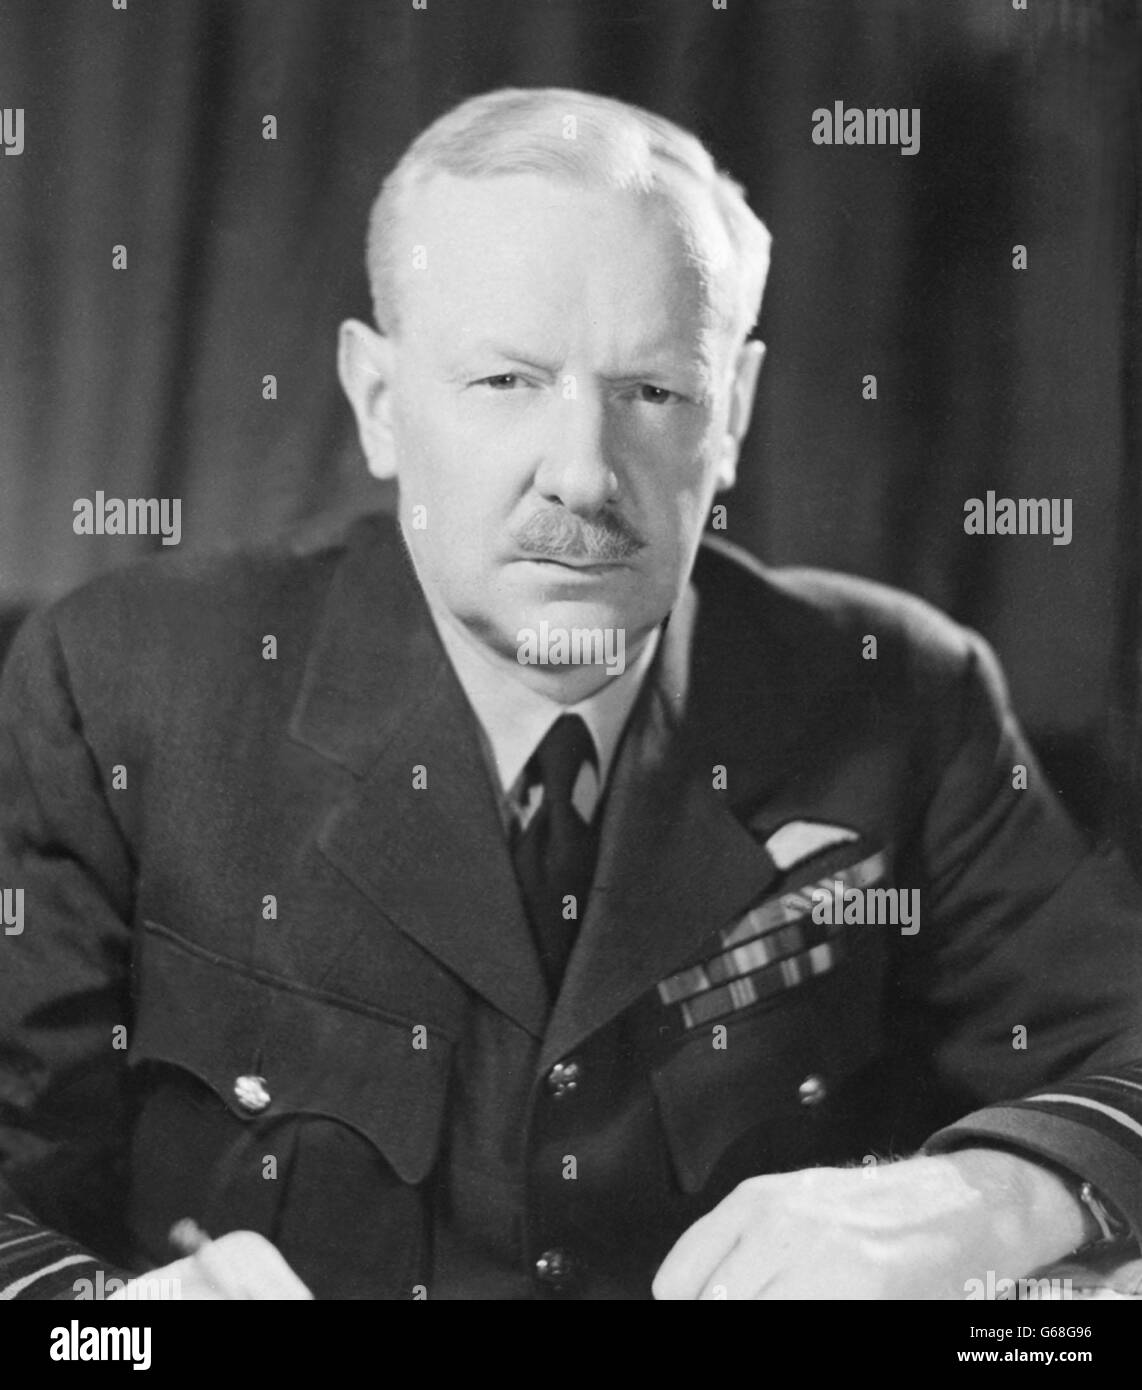 Sir Arthur 'Bomber' Harris. RAF chief Harris was responsible for adopting the controversial 'blanket-bombing' strategy in World War II which killed hundreds of thousands of German civilians and cost the lives of 55,000 airmen. Stock Photo